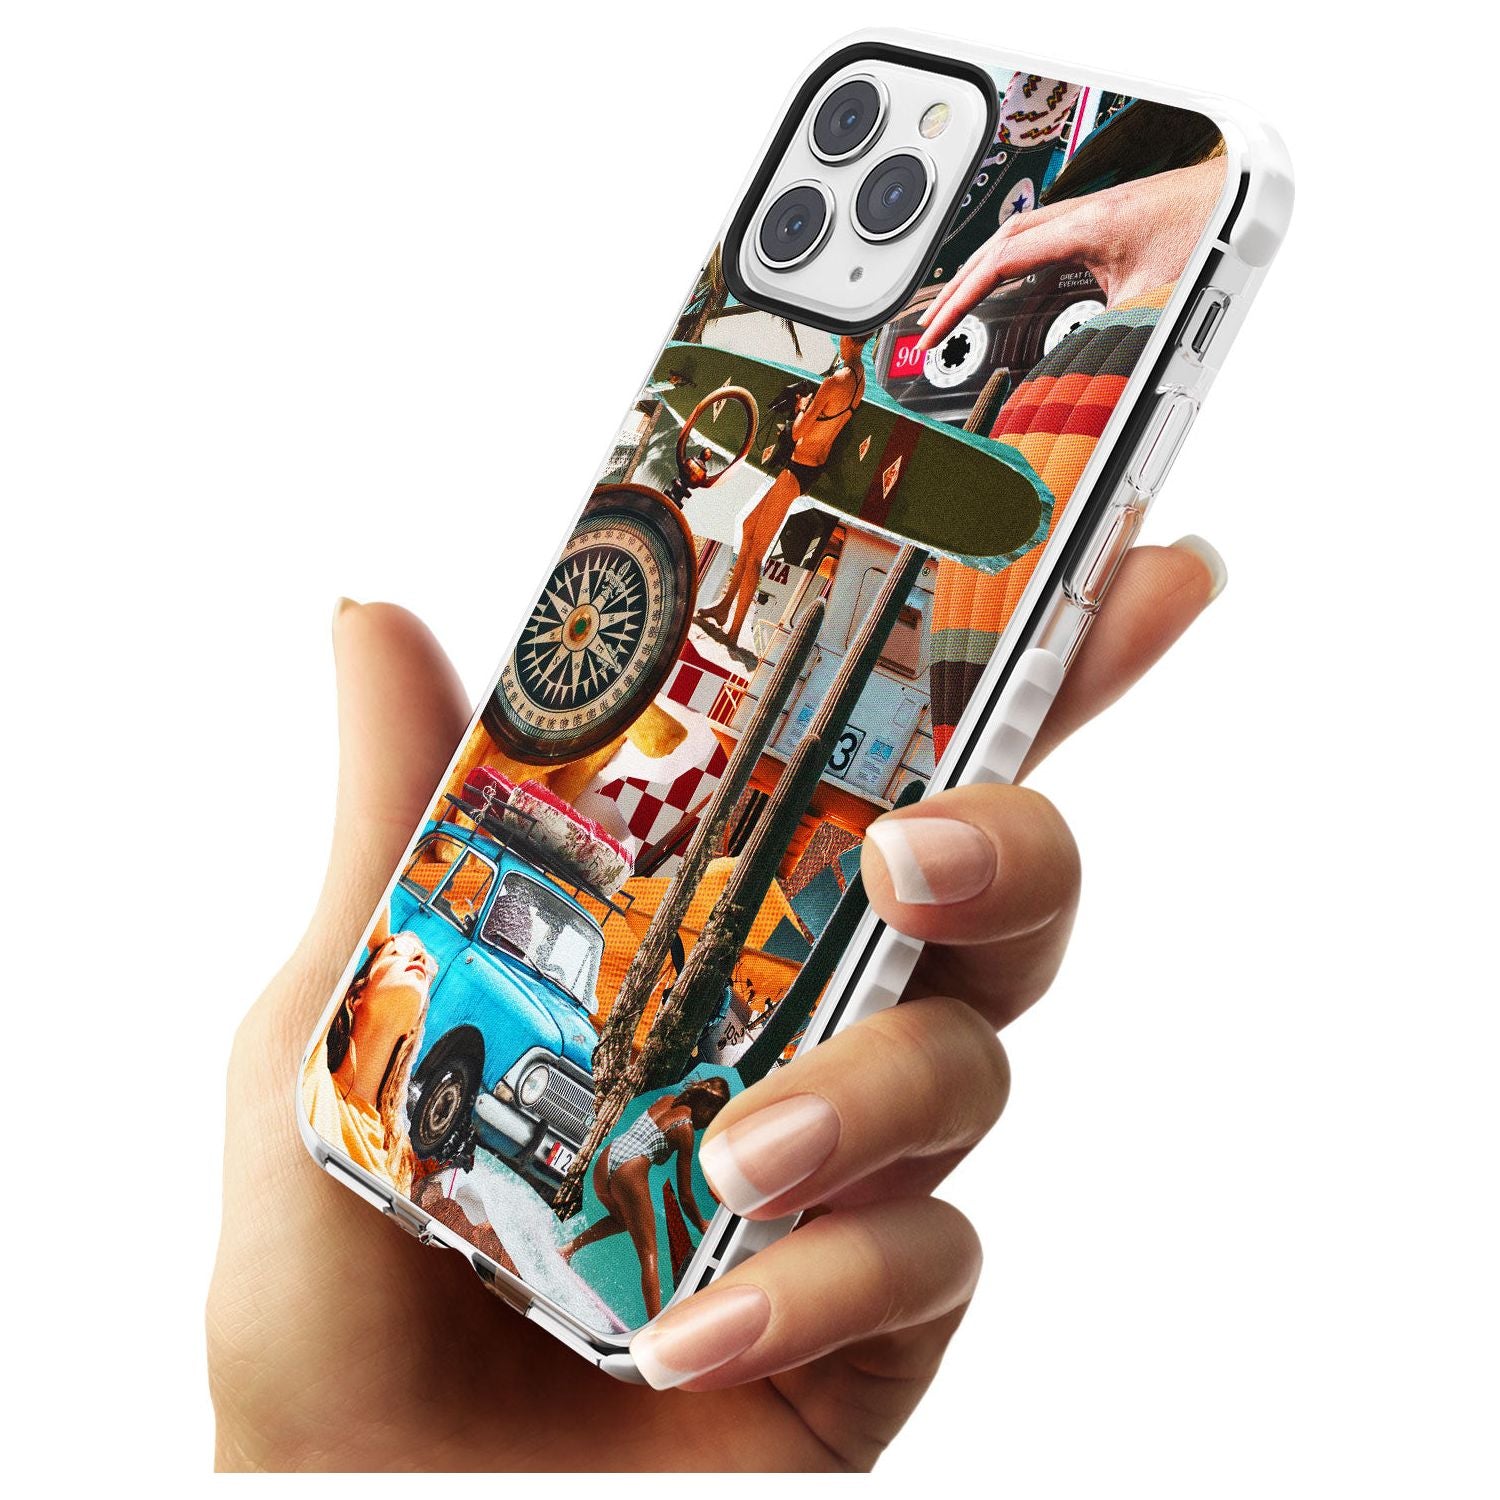 Vintage Collage: Road Trip Impact Phone Case for iPhone 11 Pro Max